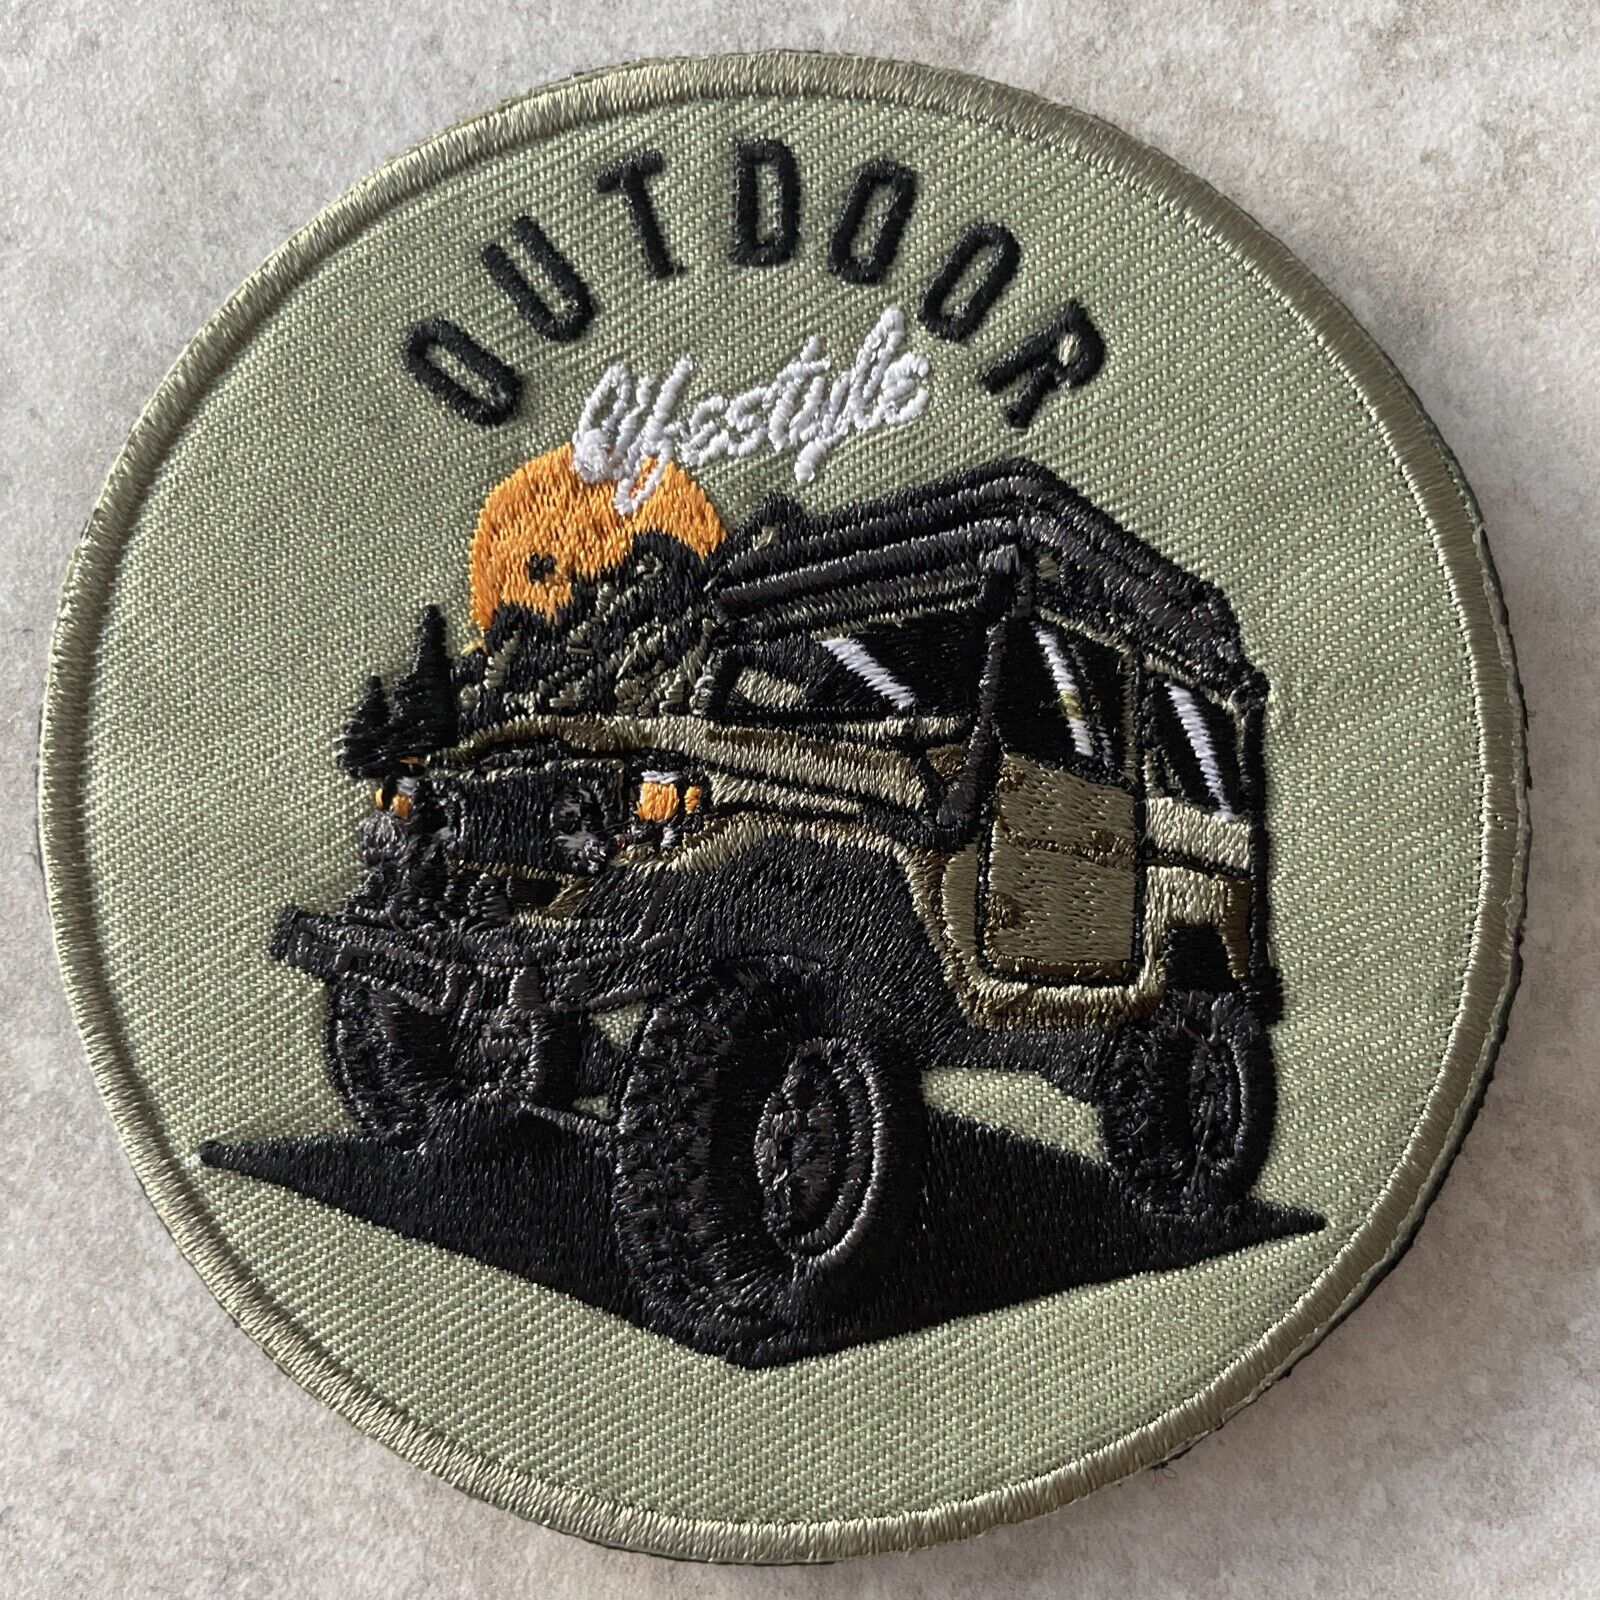 *BRAND NEW* LAND ROVER DEFENDER STYLE OUTDOOR LIFESTYLE PATCH HOOK AND LOOK BACK